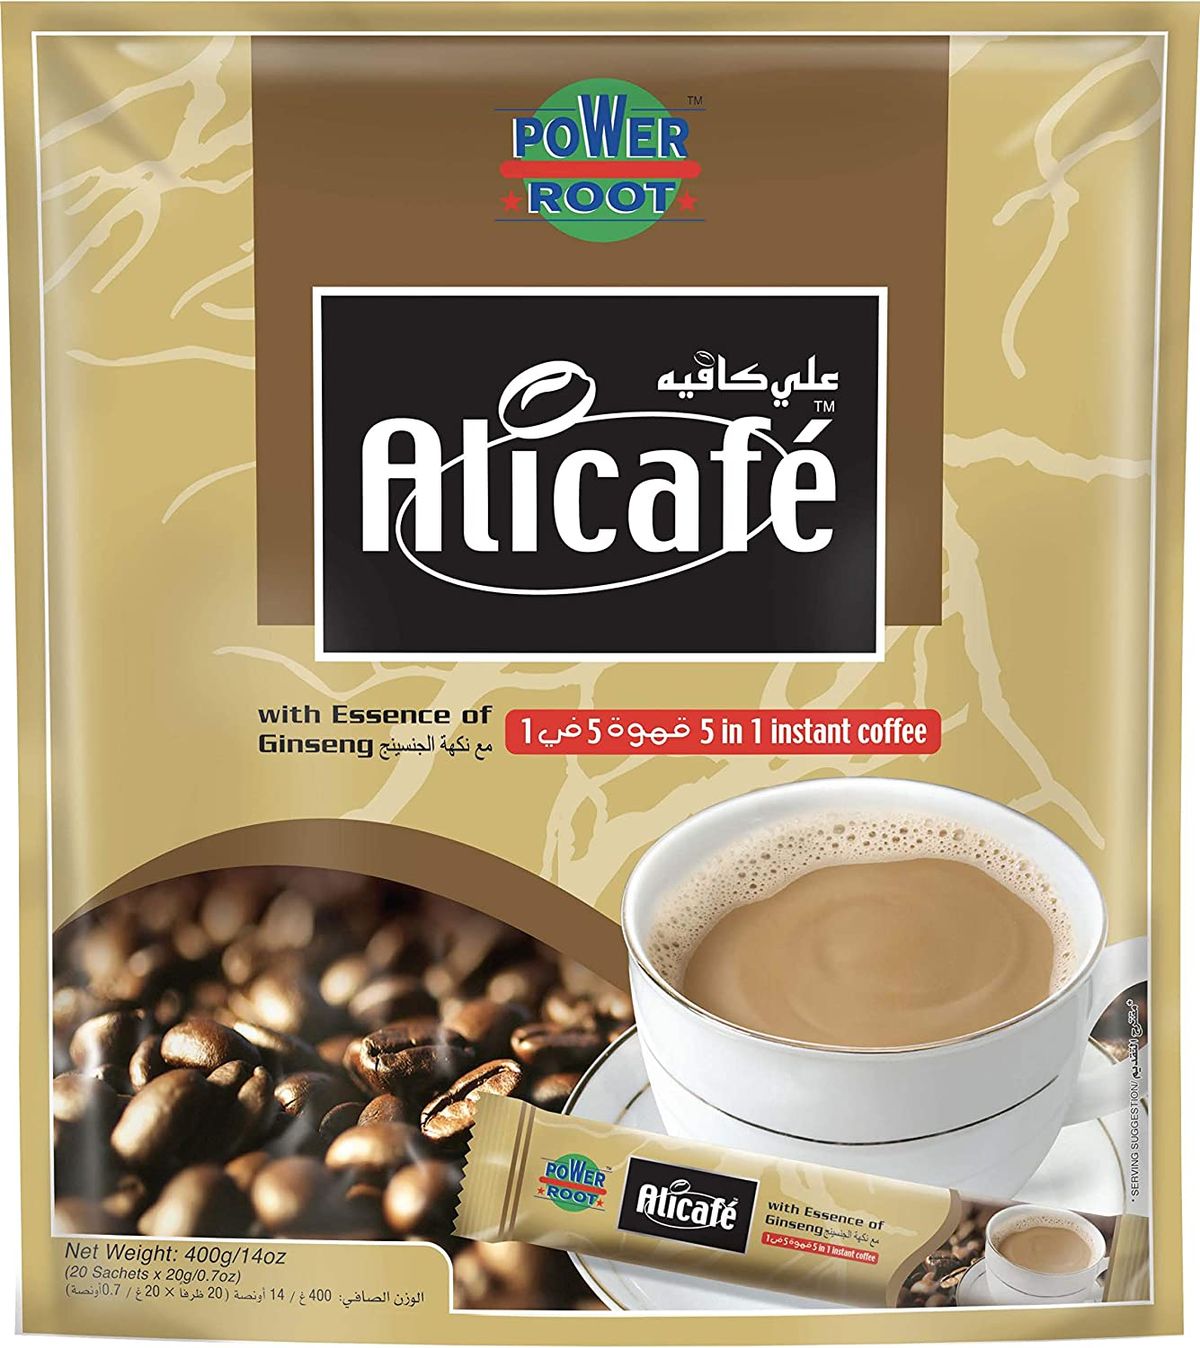 Alicafe Instant Coffee Image